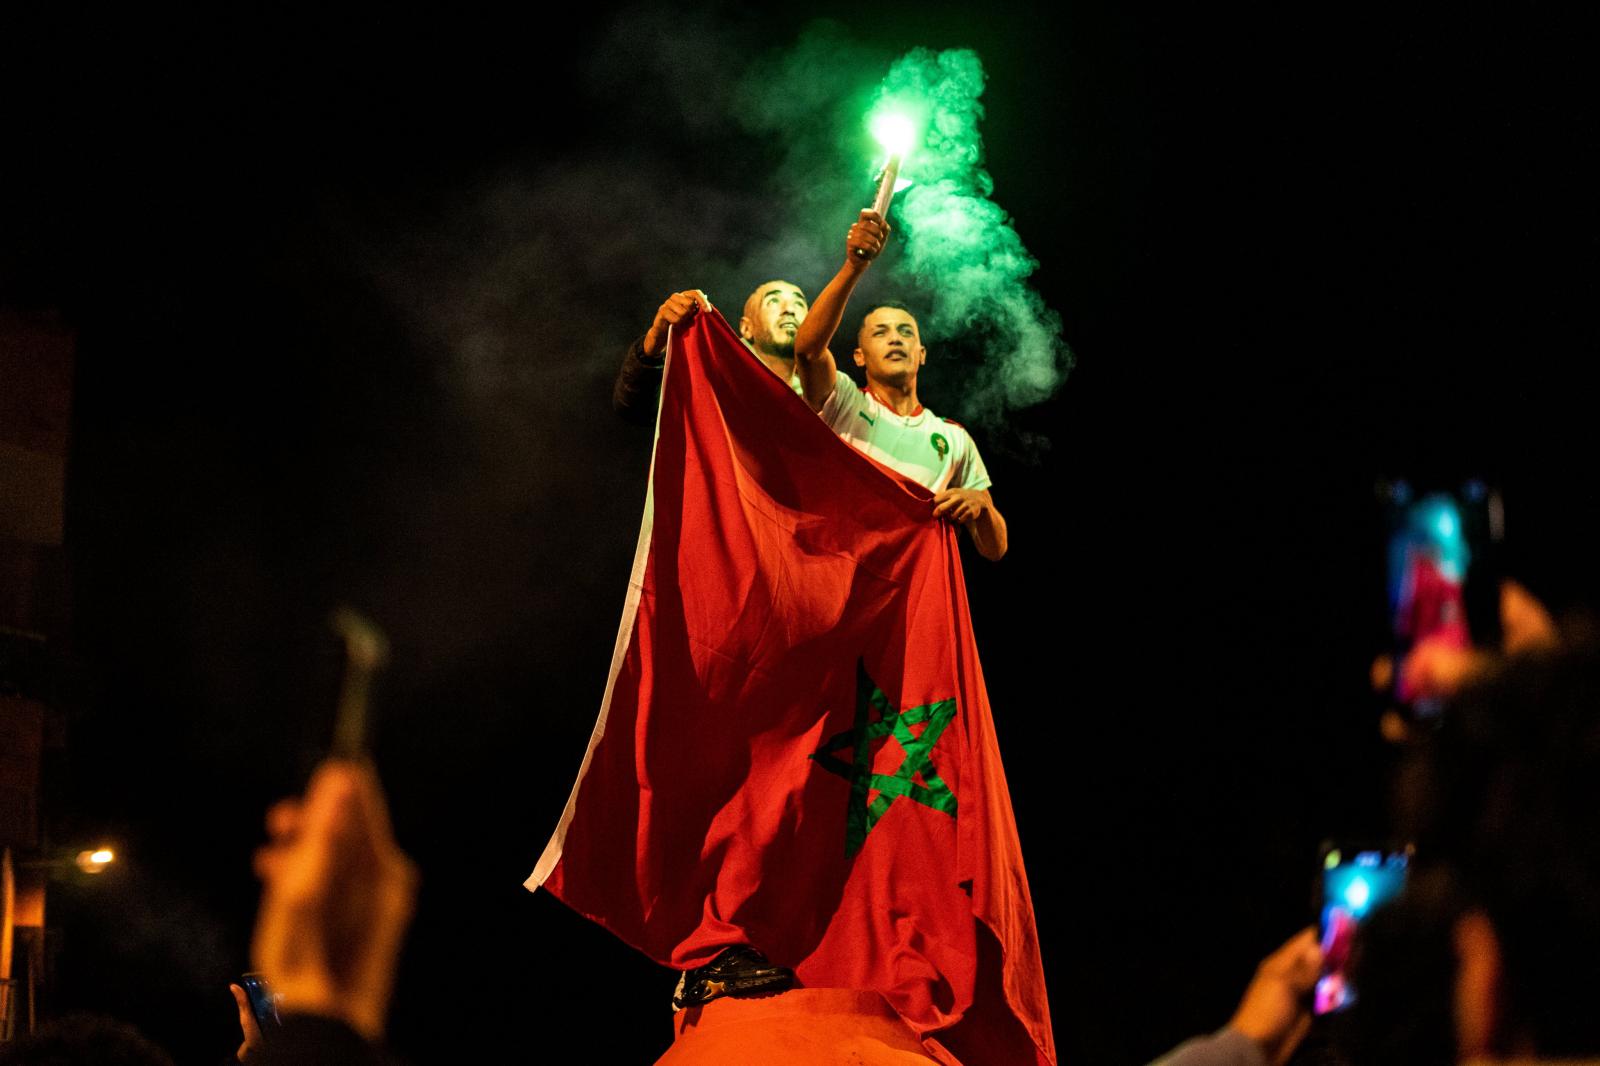 Image from Overview - Moroccan football team supporters celebrate their win...